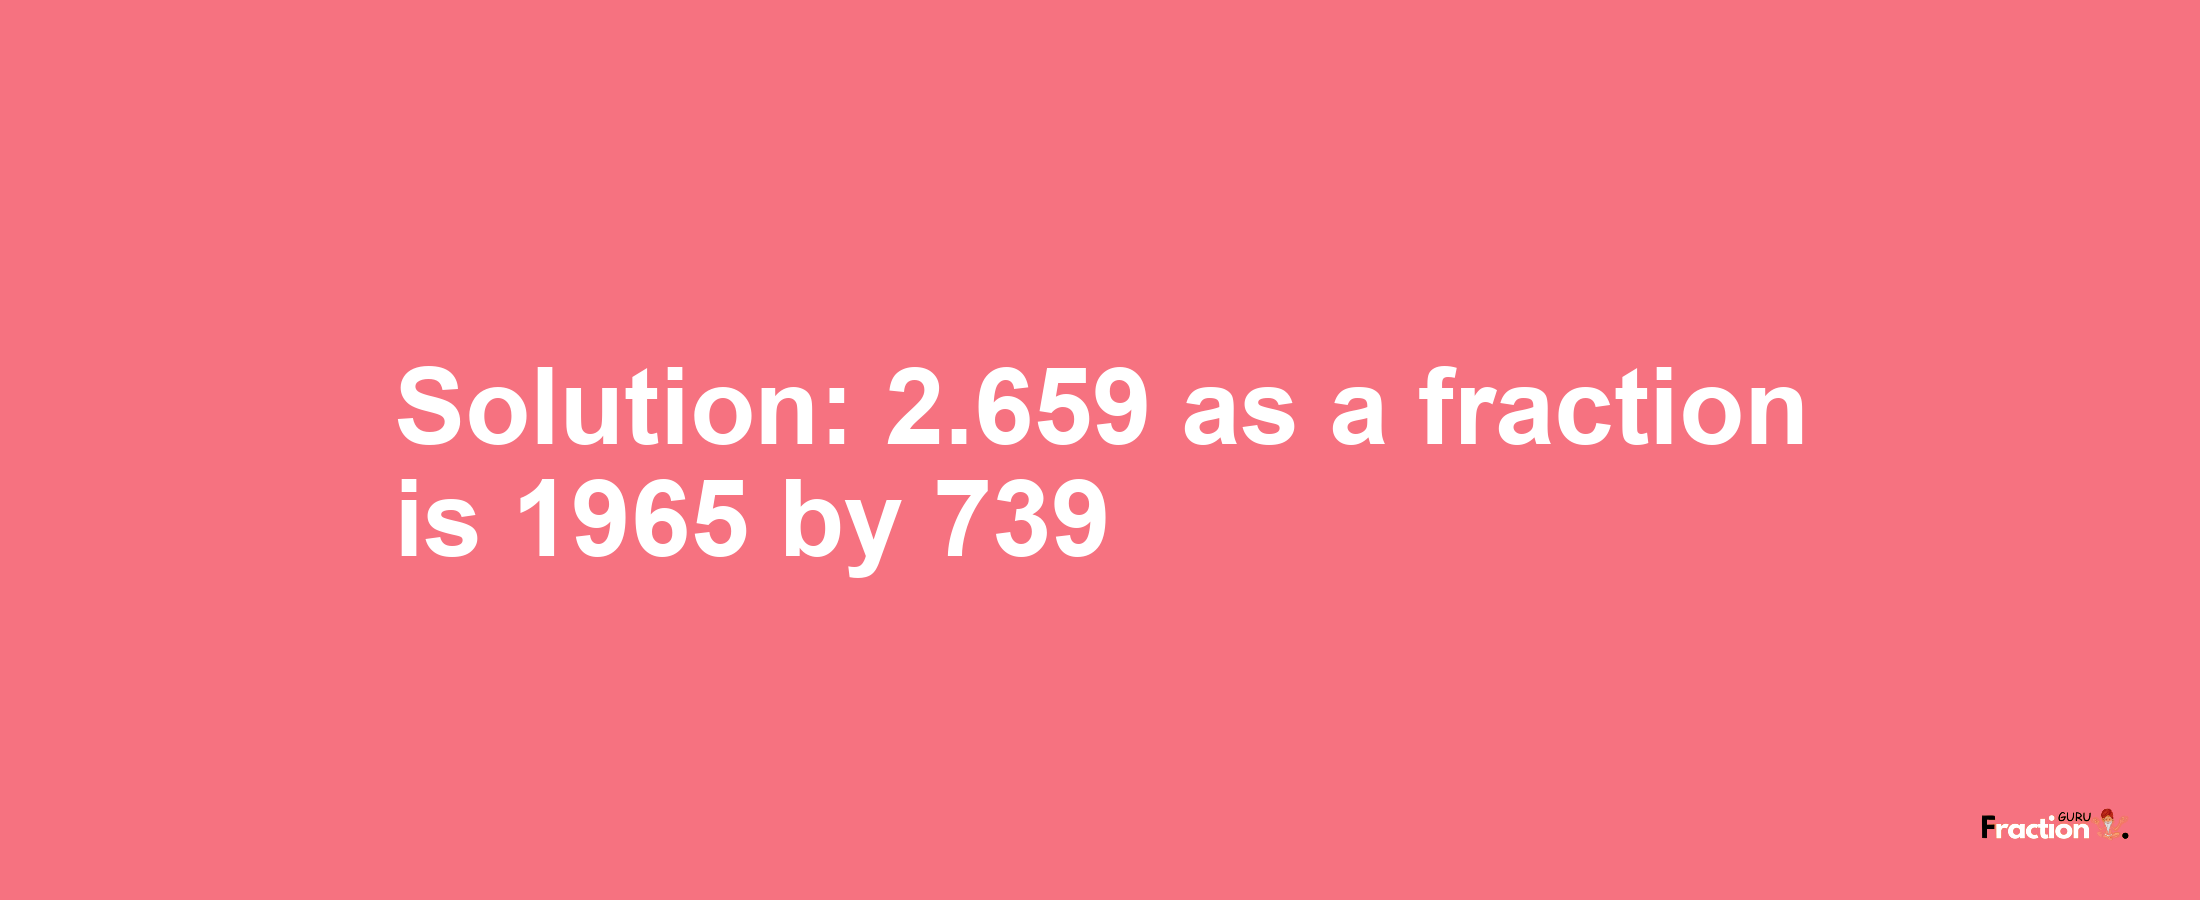 Solution:2.659 as a fraction is 1965/739